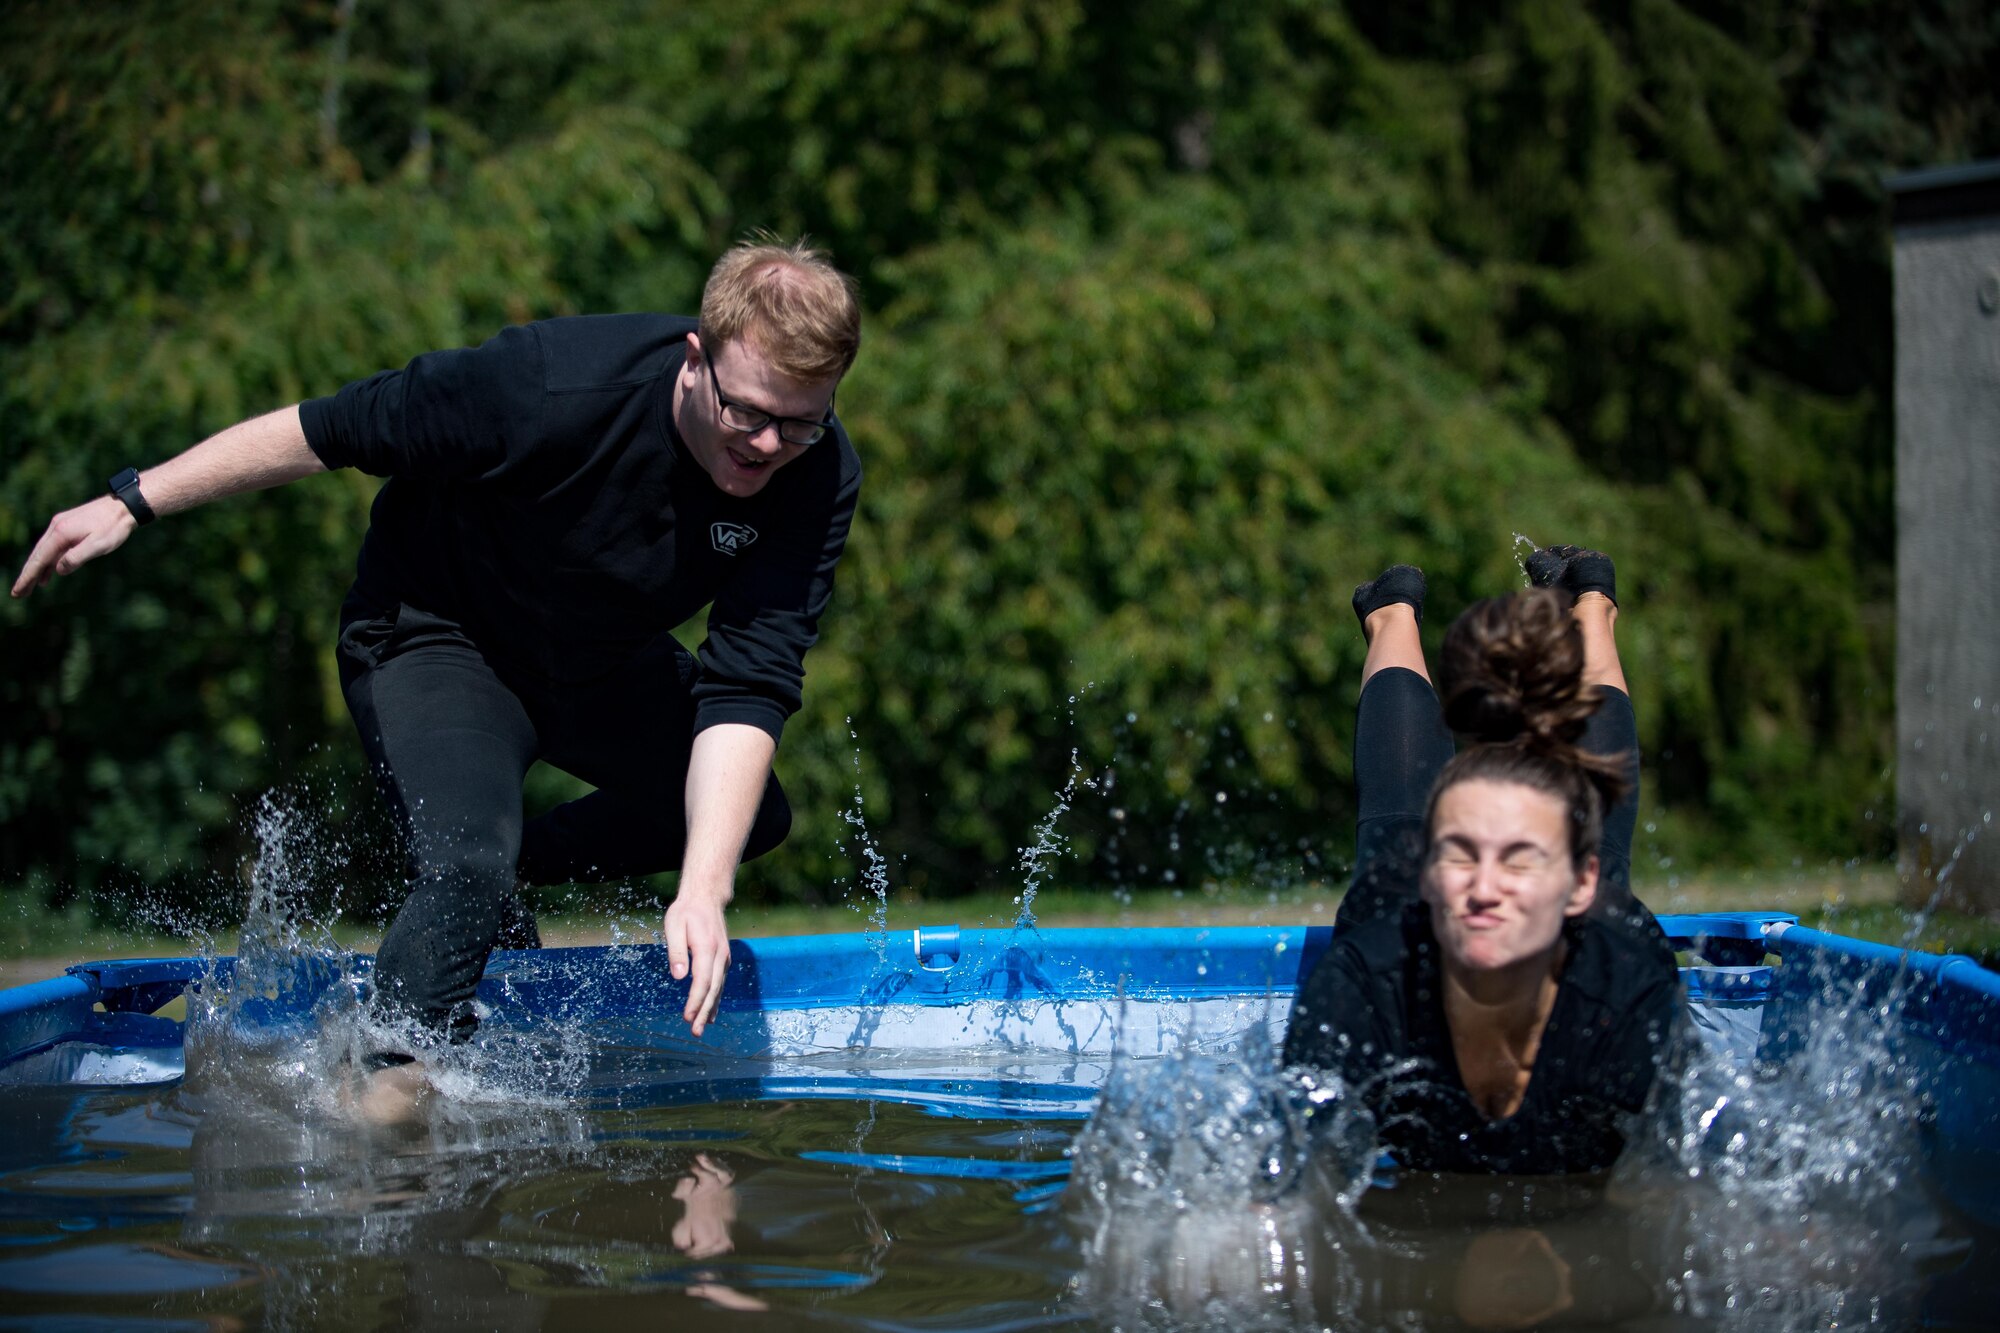 U.S. Air Force Senior Airman Michael Krawczyk and U.S. Air Force Staff Sgt. Jordan Hebner, both 86th Dental Squadron dental assistants, leap into a pool during the annual Mudless Mudder on Ramstein Air Base, Germany, July 21, 2017. If teams could not clear an obstacle, they were required to perform ten burpees to continue the race. (U.S. Air Force photo by Senior Airman Devin Boyer)